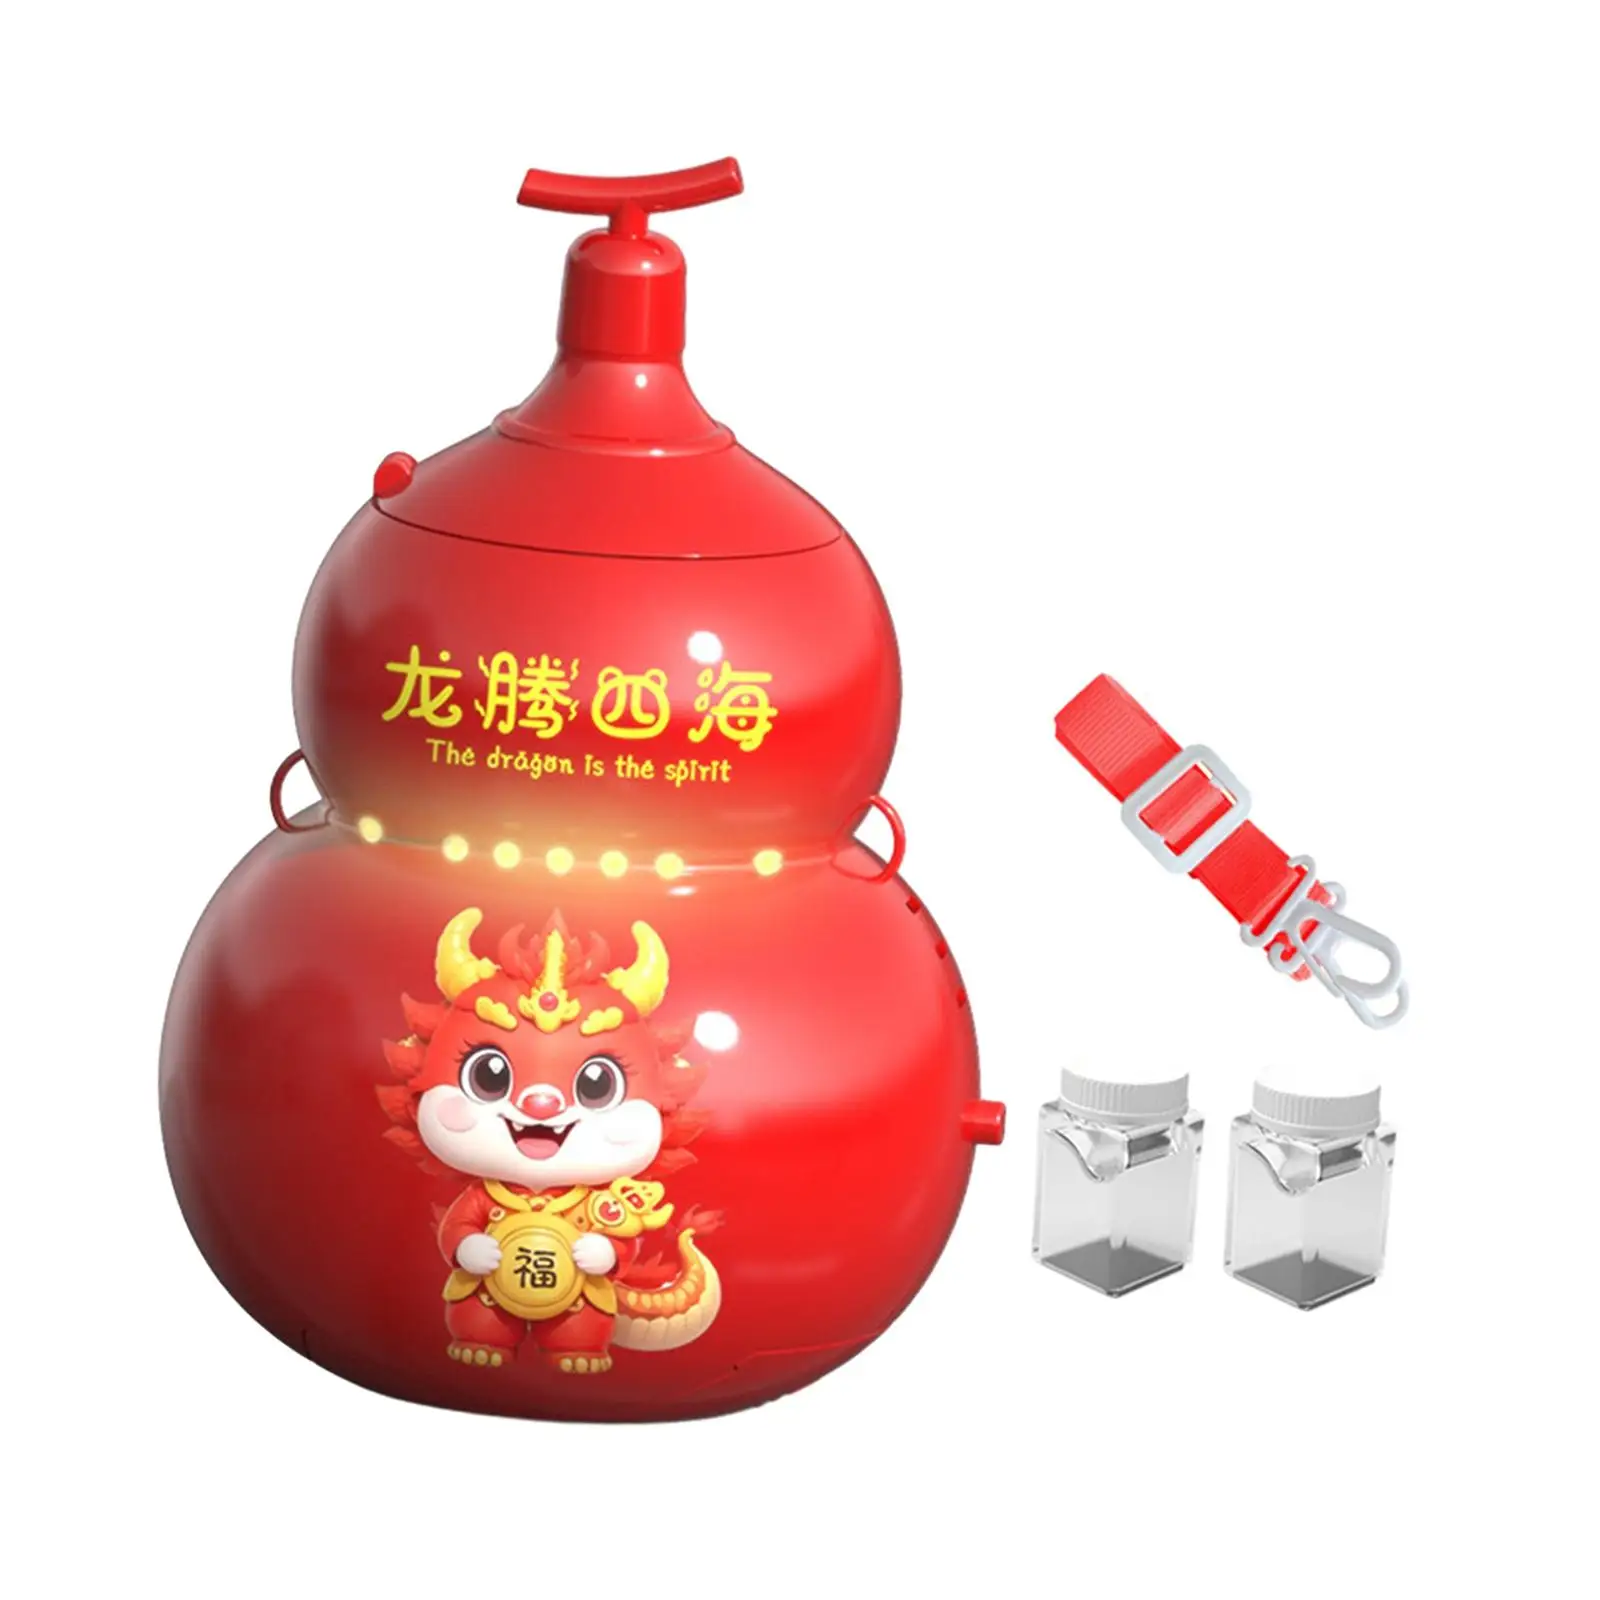 Fireworks Bubble Machine Automatic Beach Toy Big Bubble with Sounds Chinese New Year for New Year Party Indoor Garden Lawn